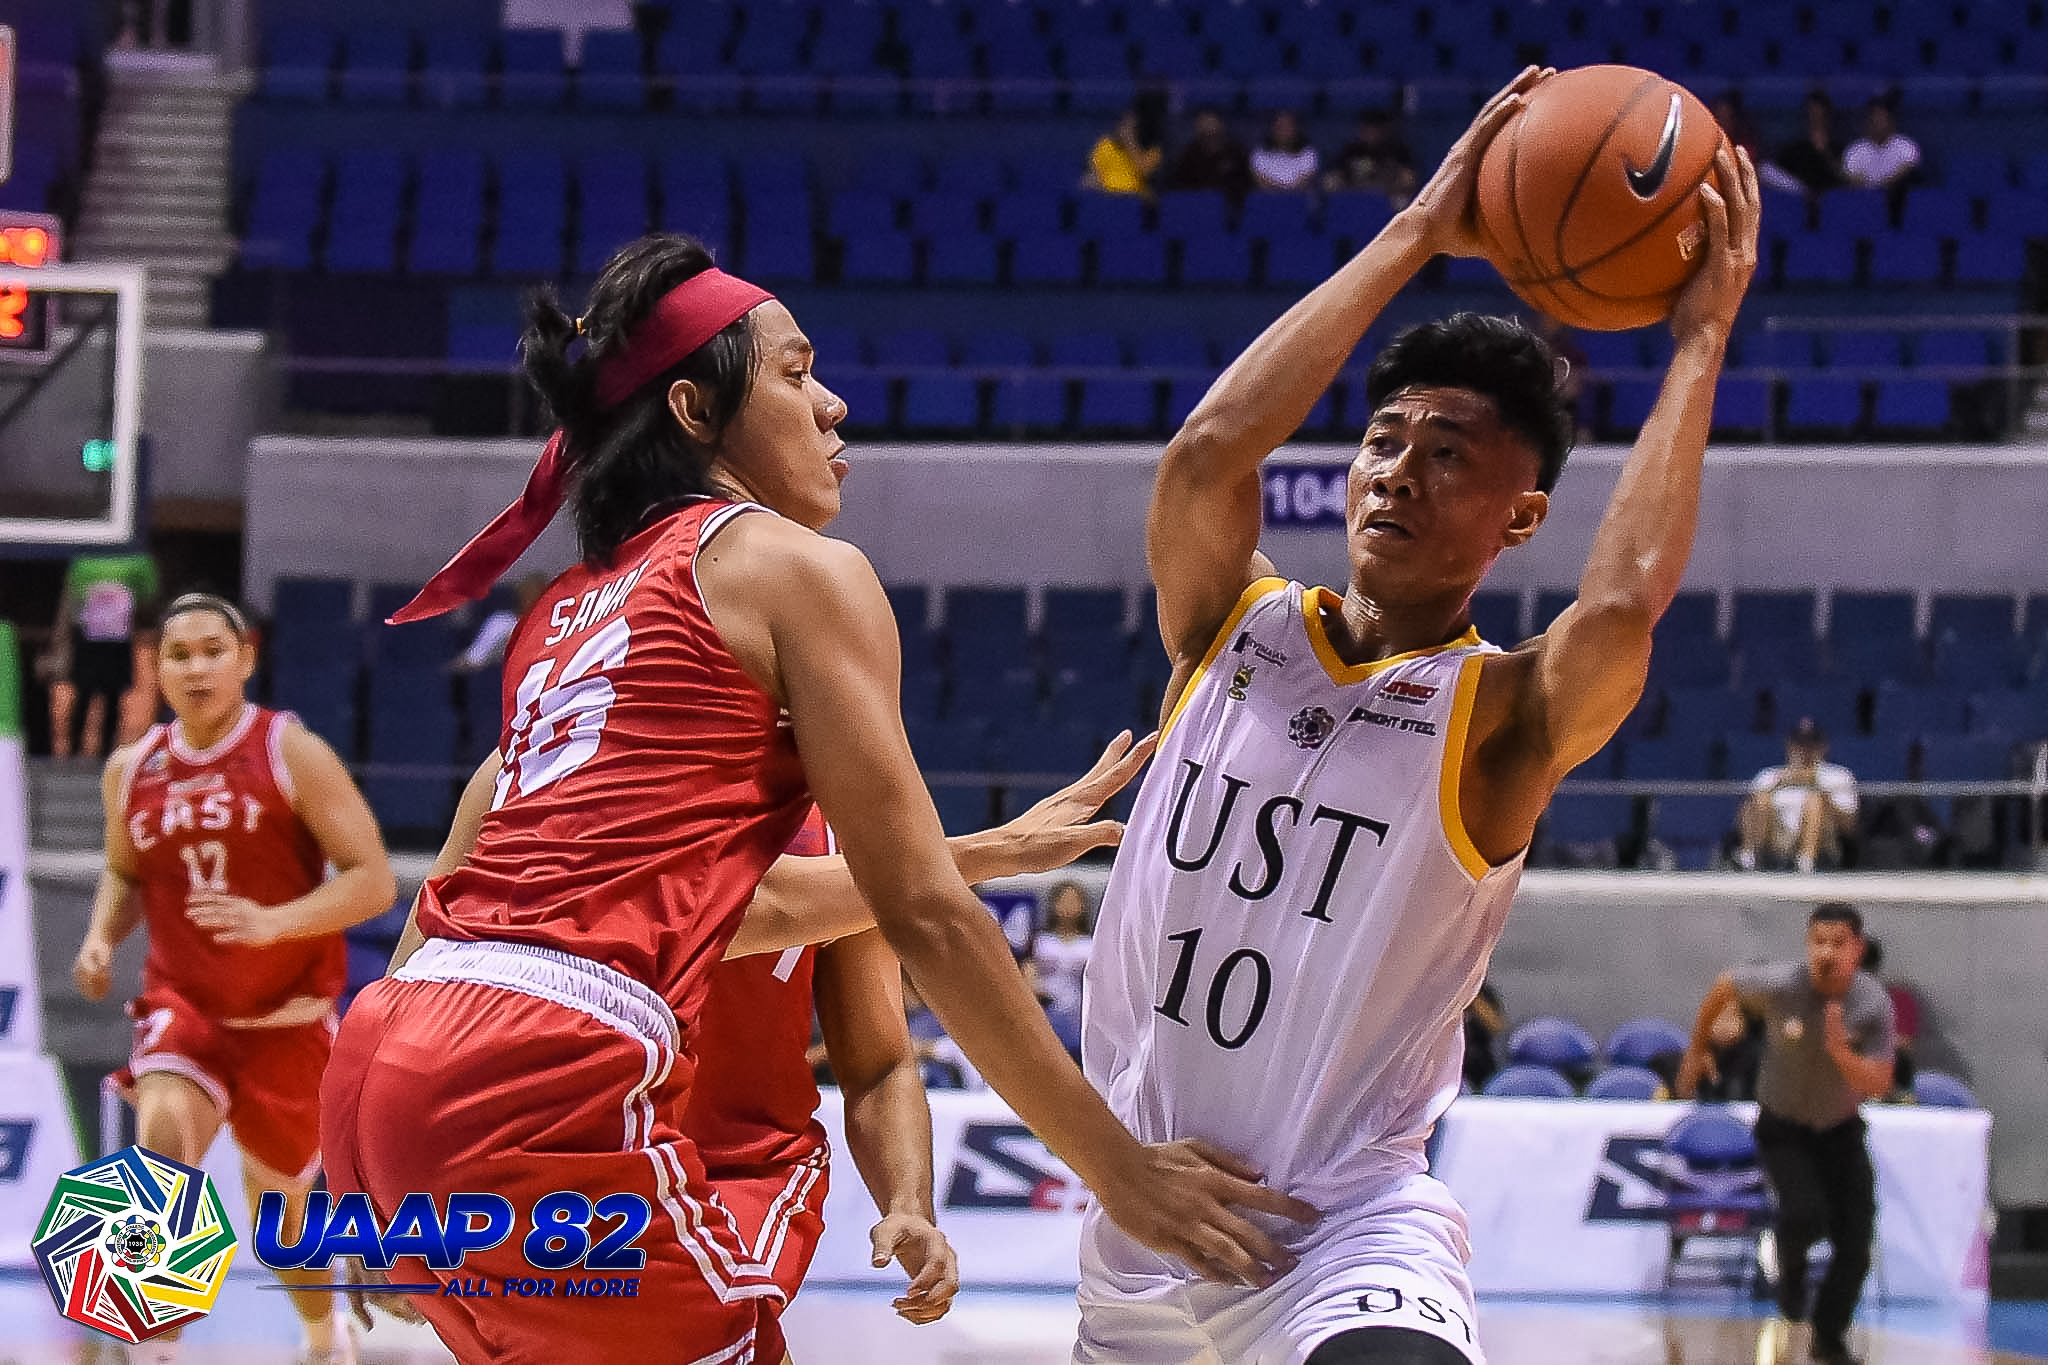 UST opens Season 82 with rousing victory over UE